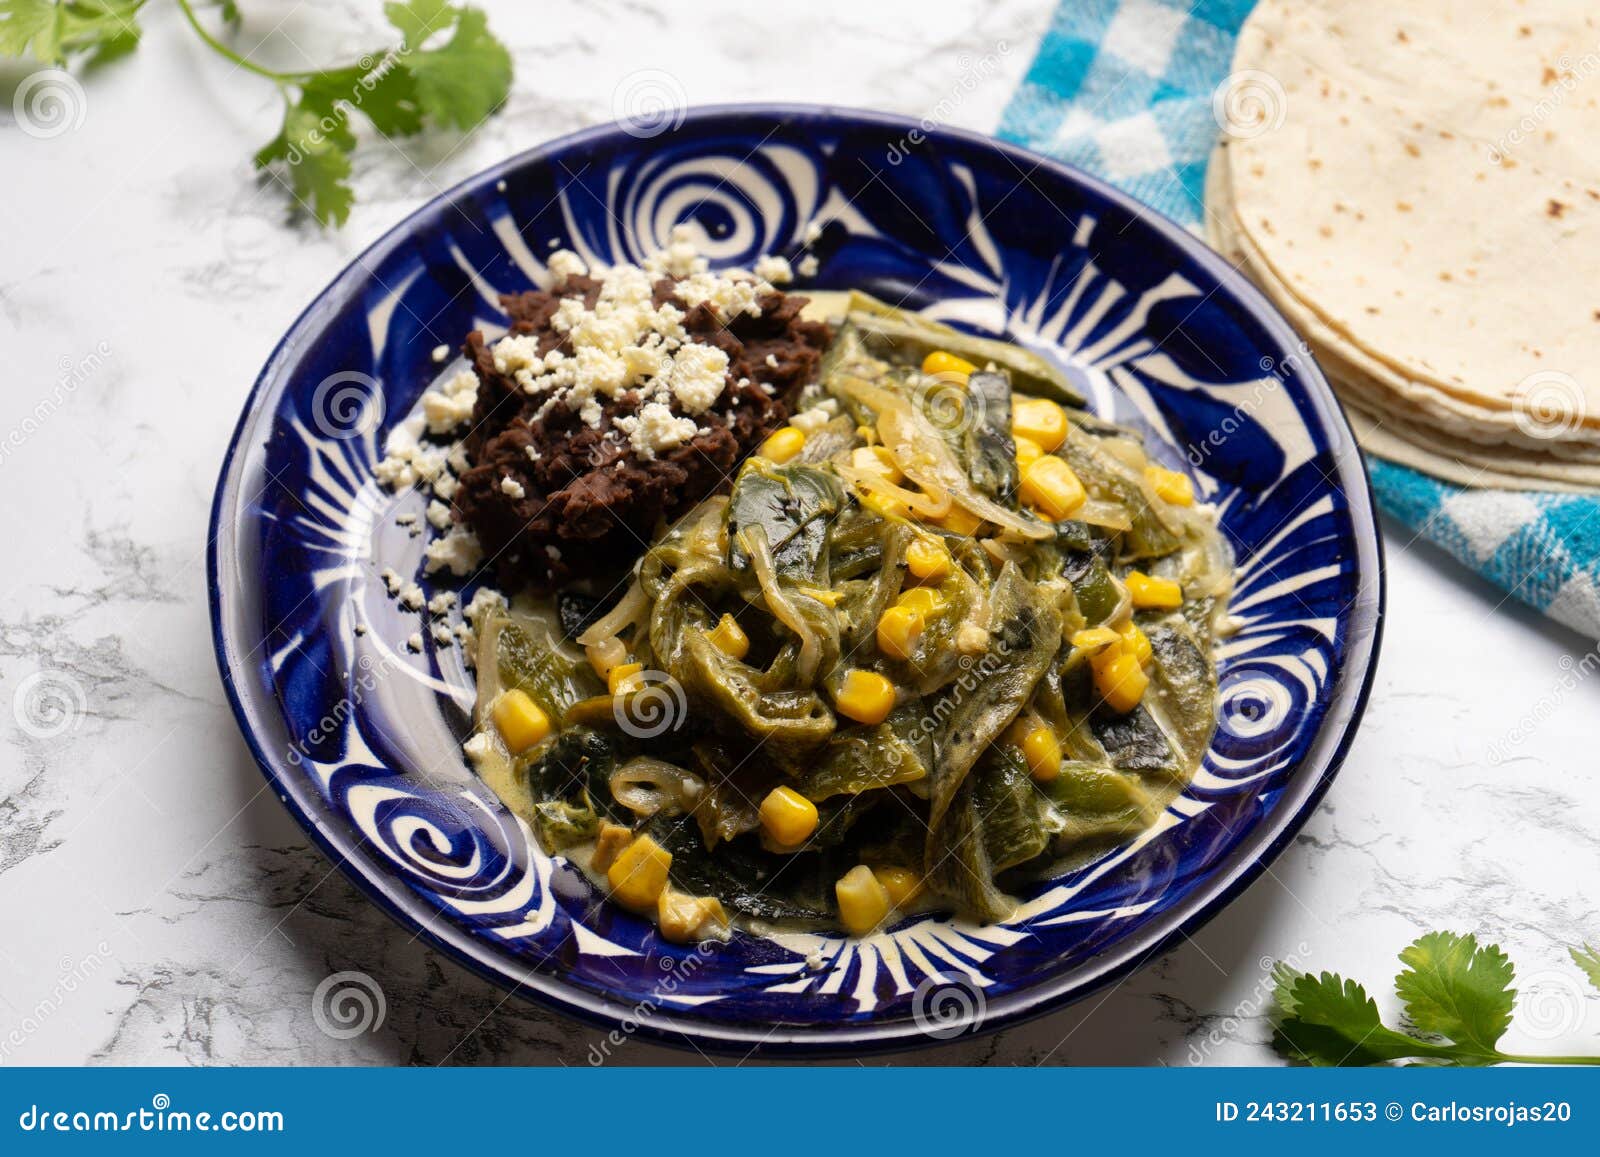 Poblano Pepper Rajas with Cream Sauce. Mexican Food Stock Image - Image ...